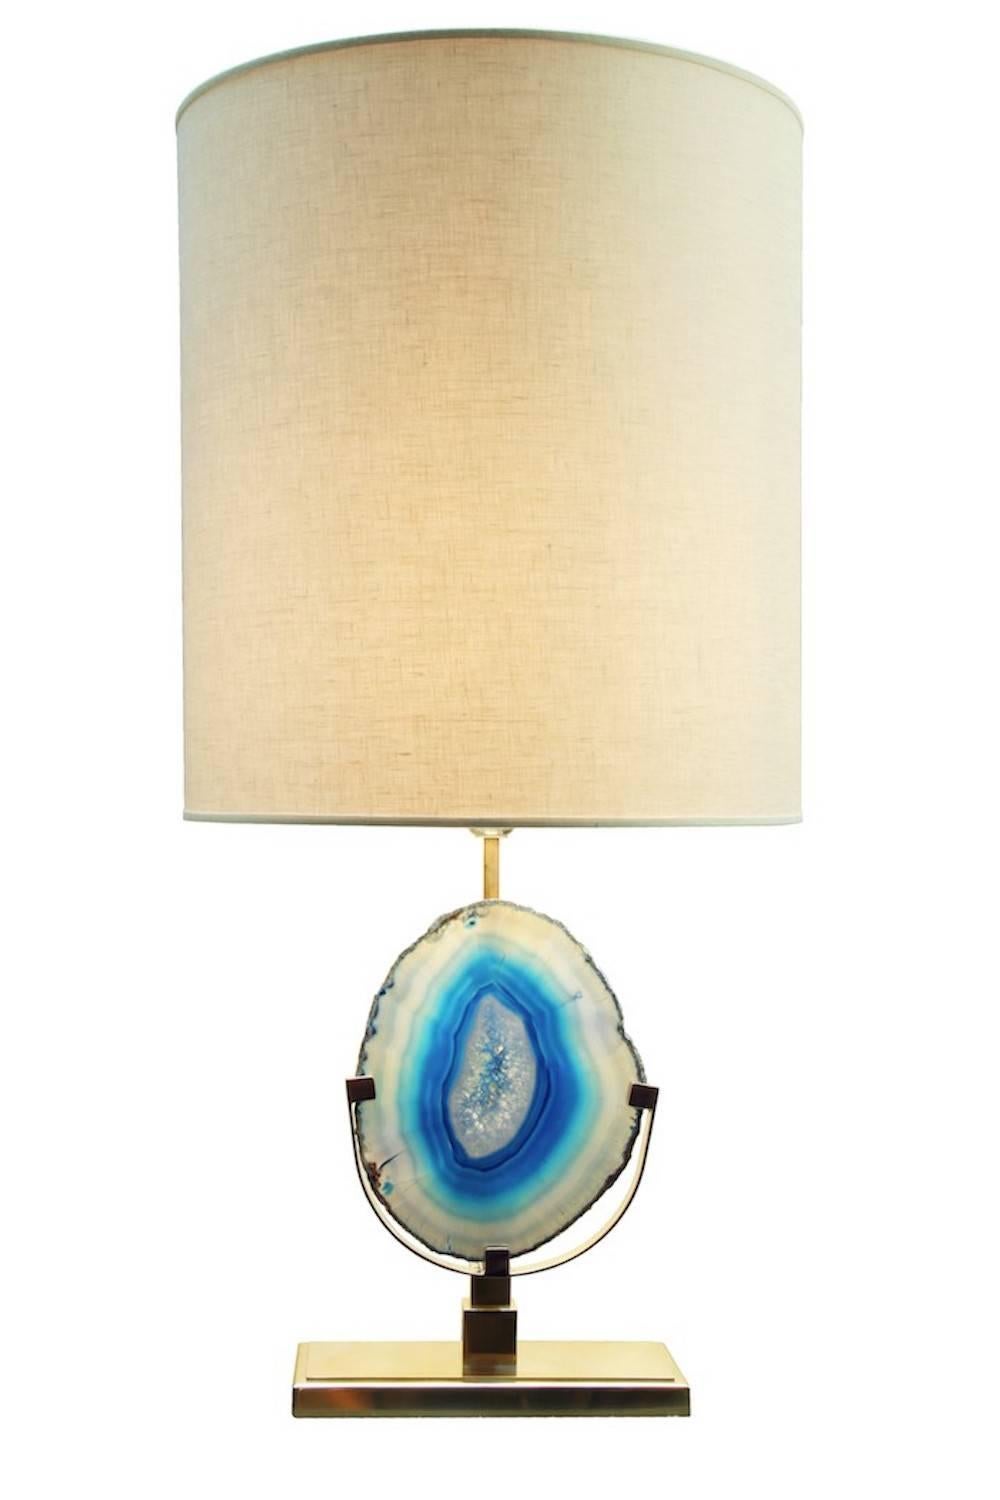 Pair of Agate table lamps in natural brass, lampshade in natural linen.
At the center of the lamp is placed a slice of agate stone, available in different colors. Each slice of this particular quartz since it's a natural element, is unique in its